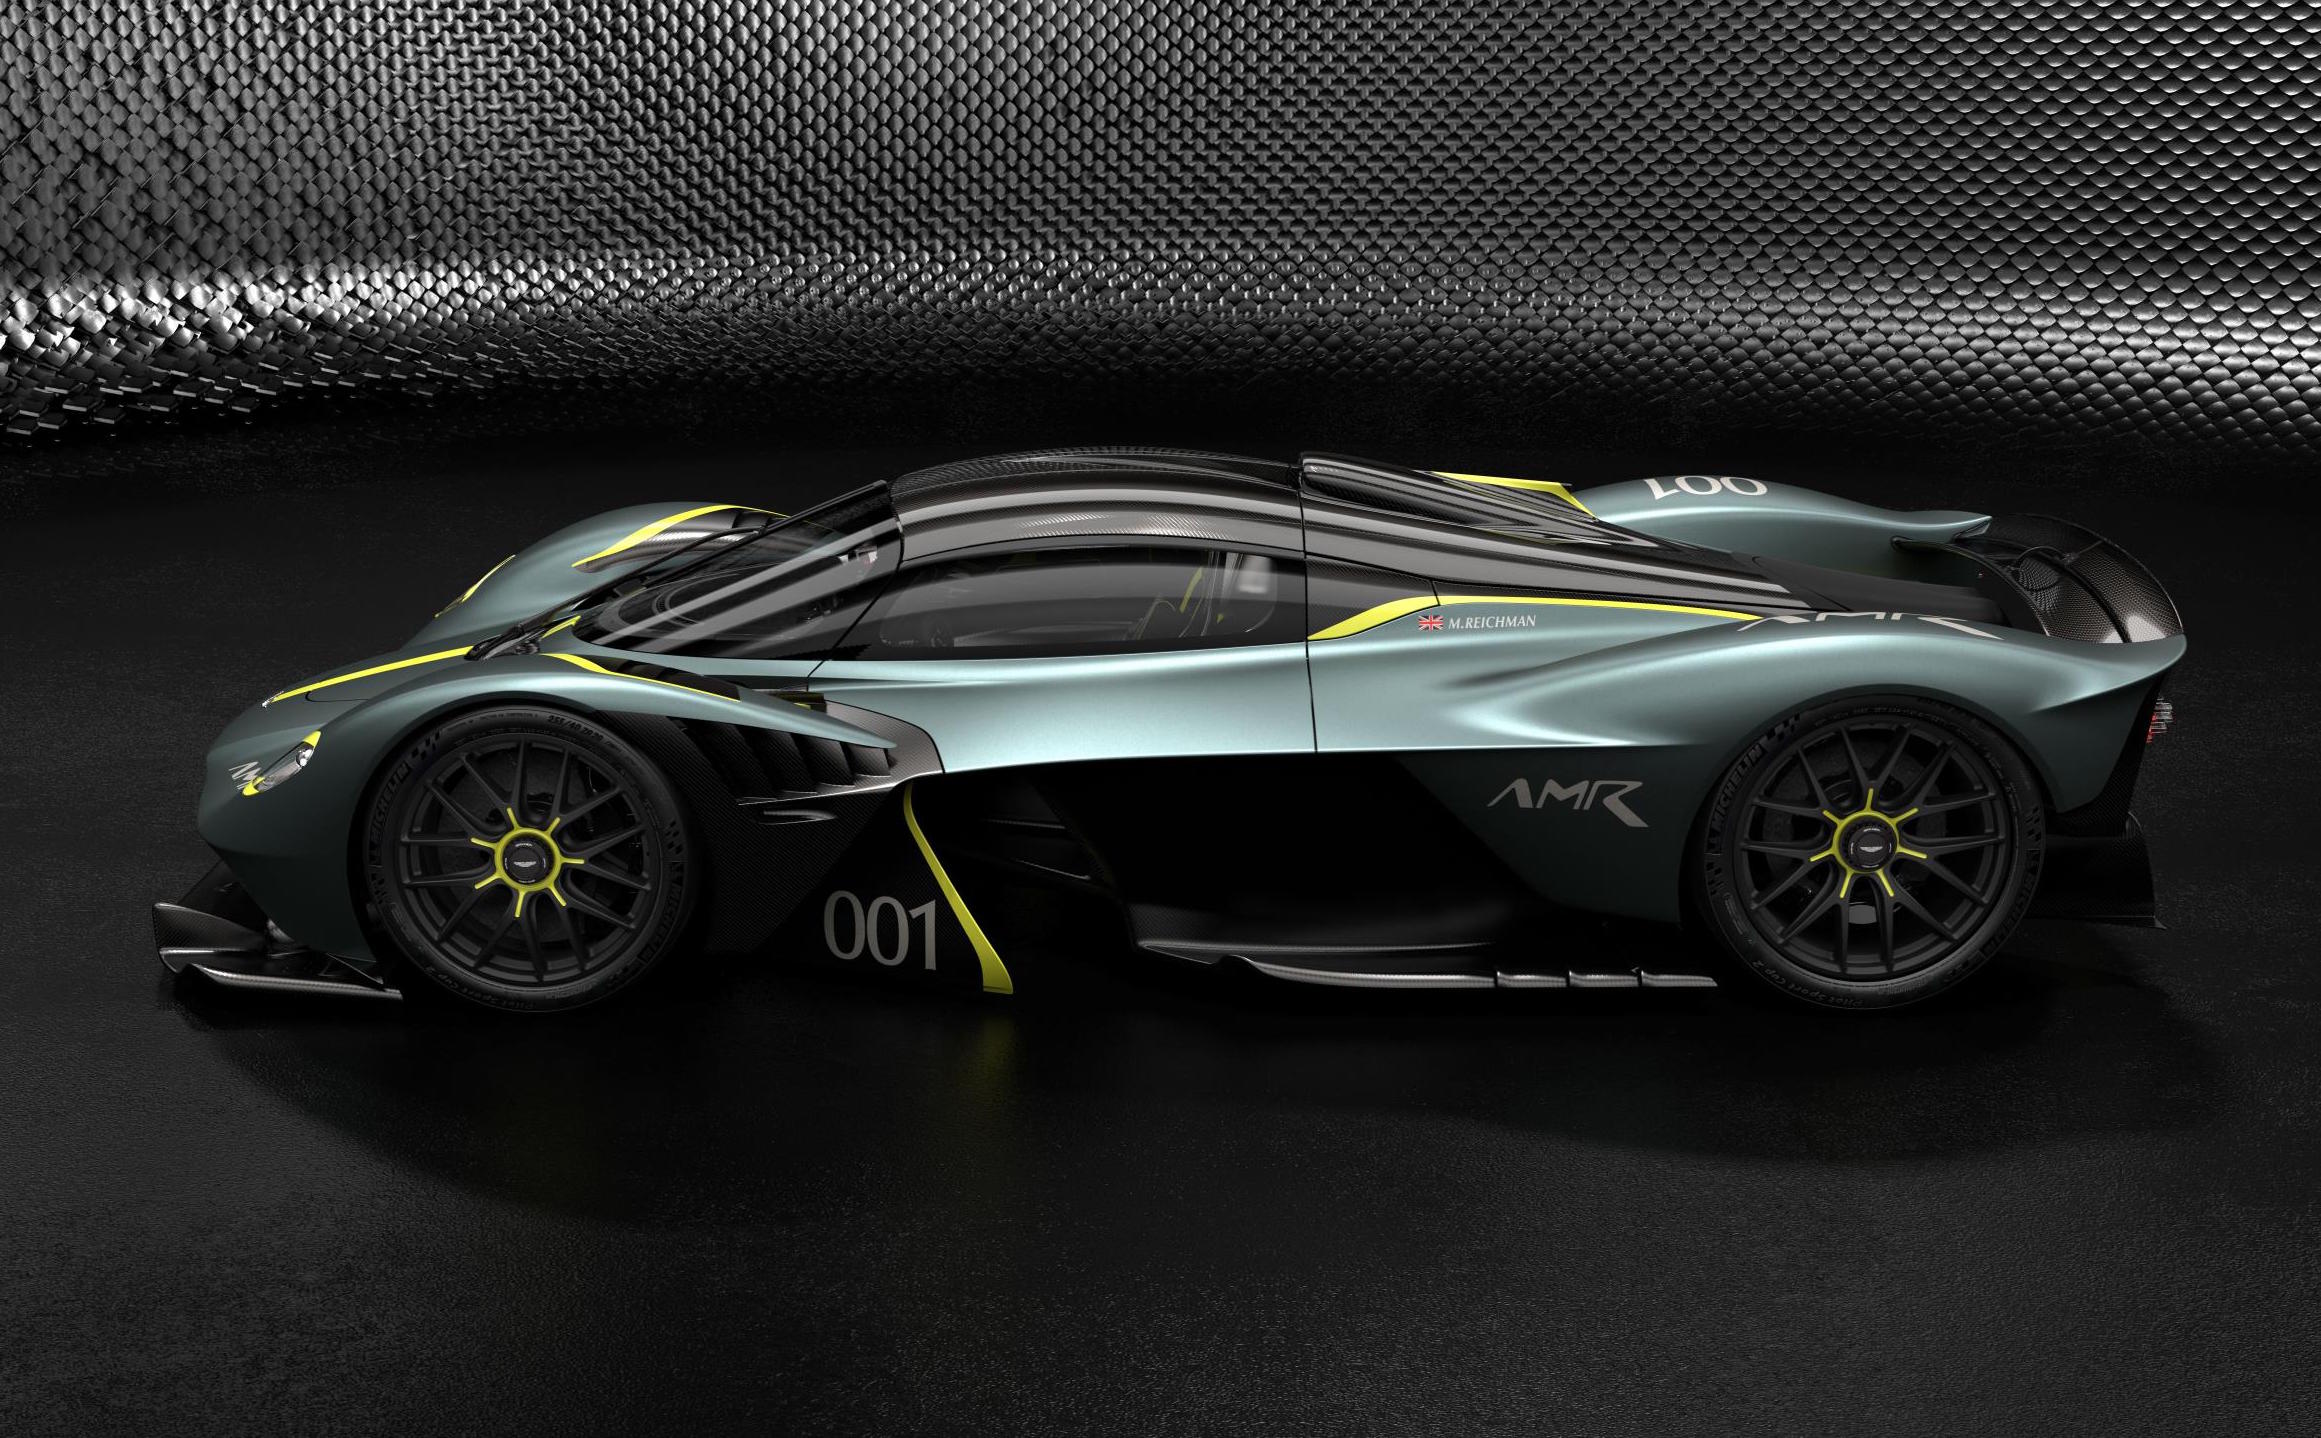 ‘Q by Aston Martin’ announces intense options for Valkyrie